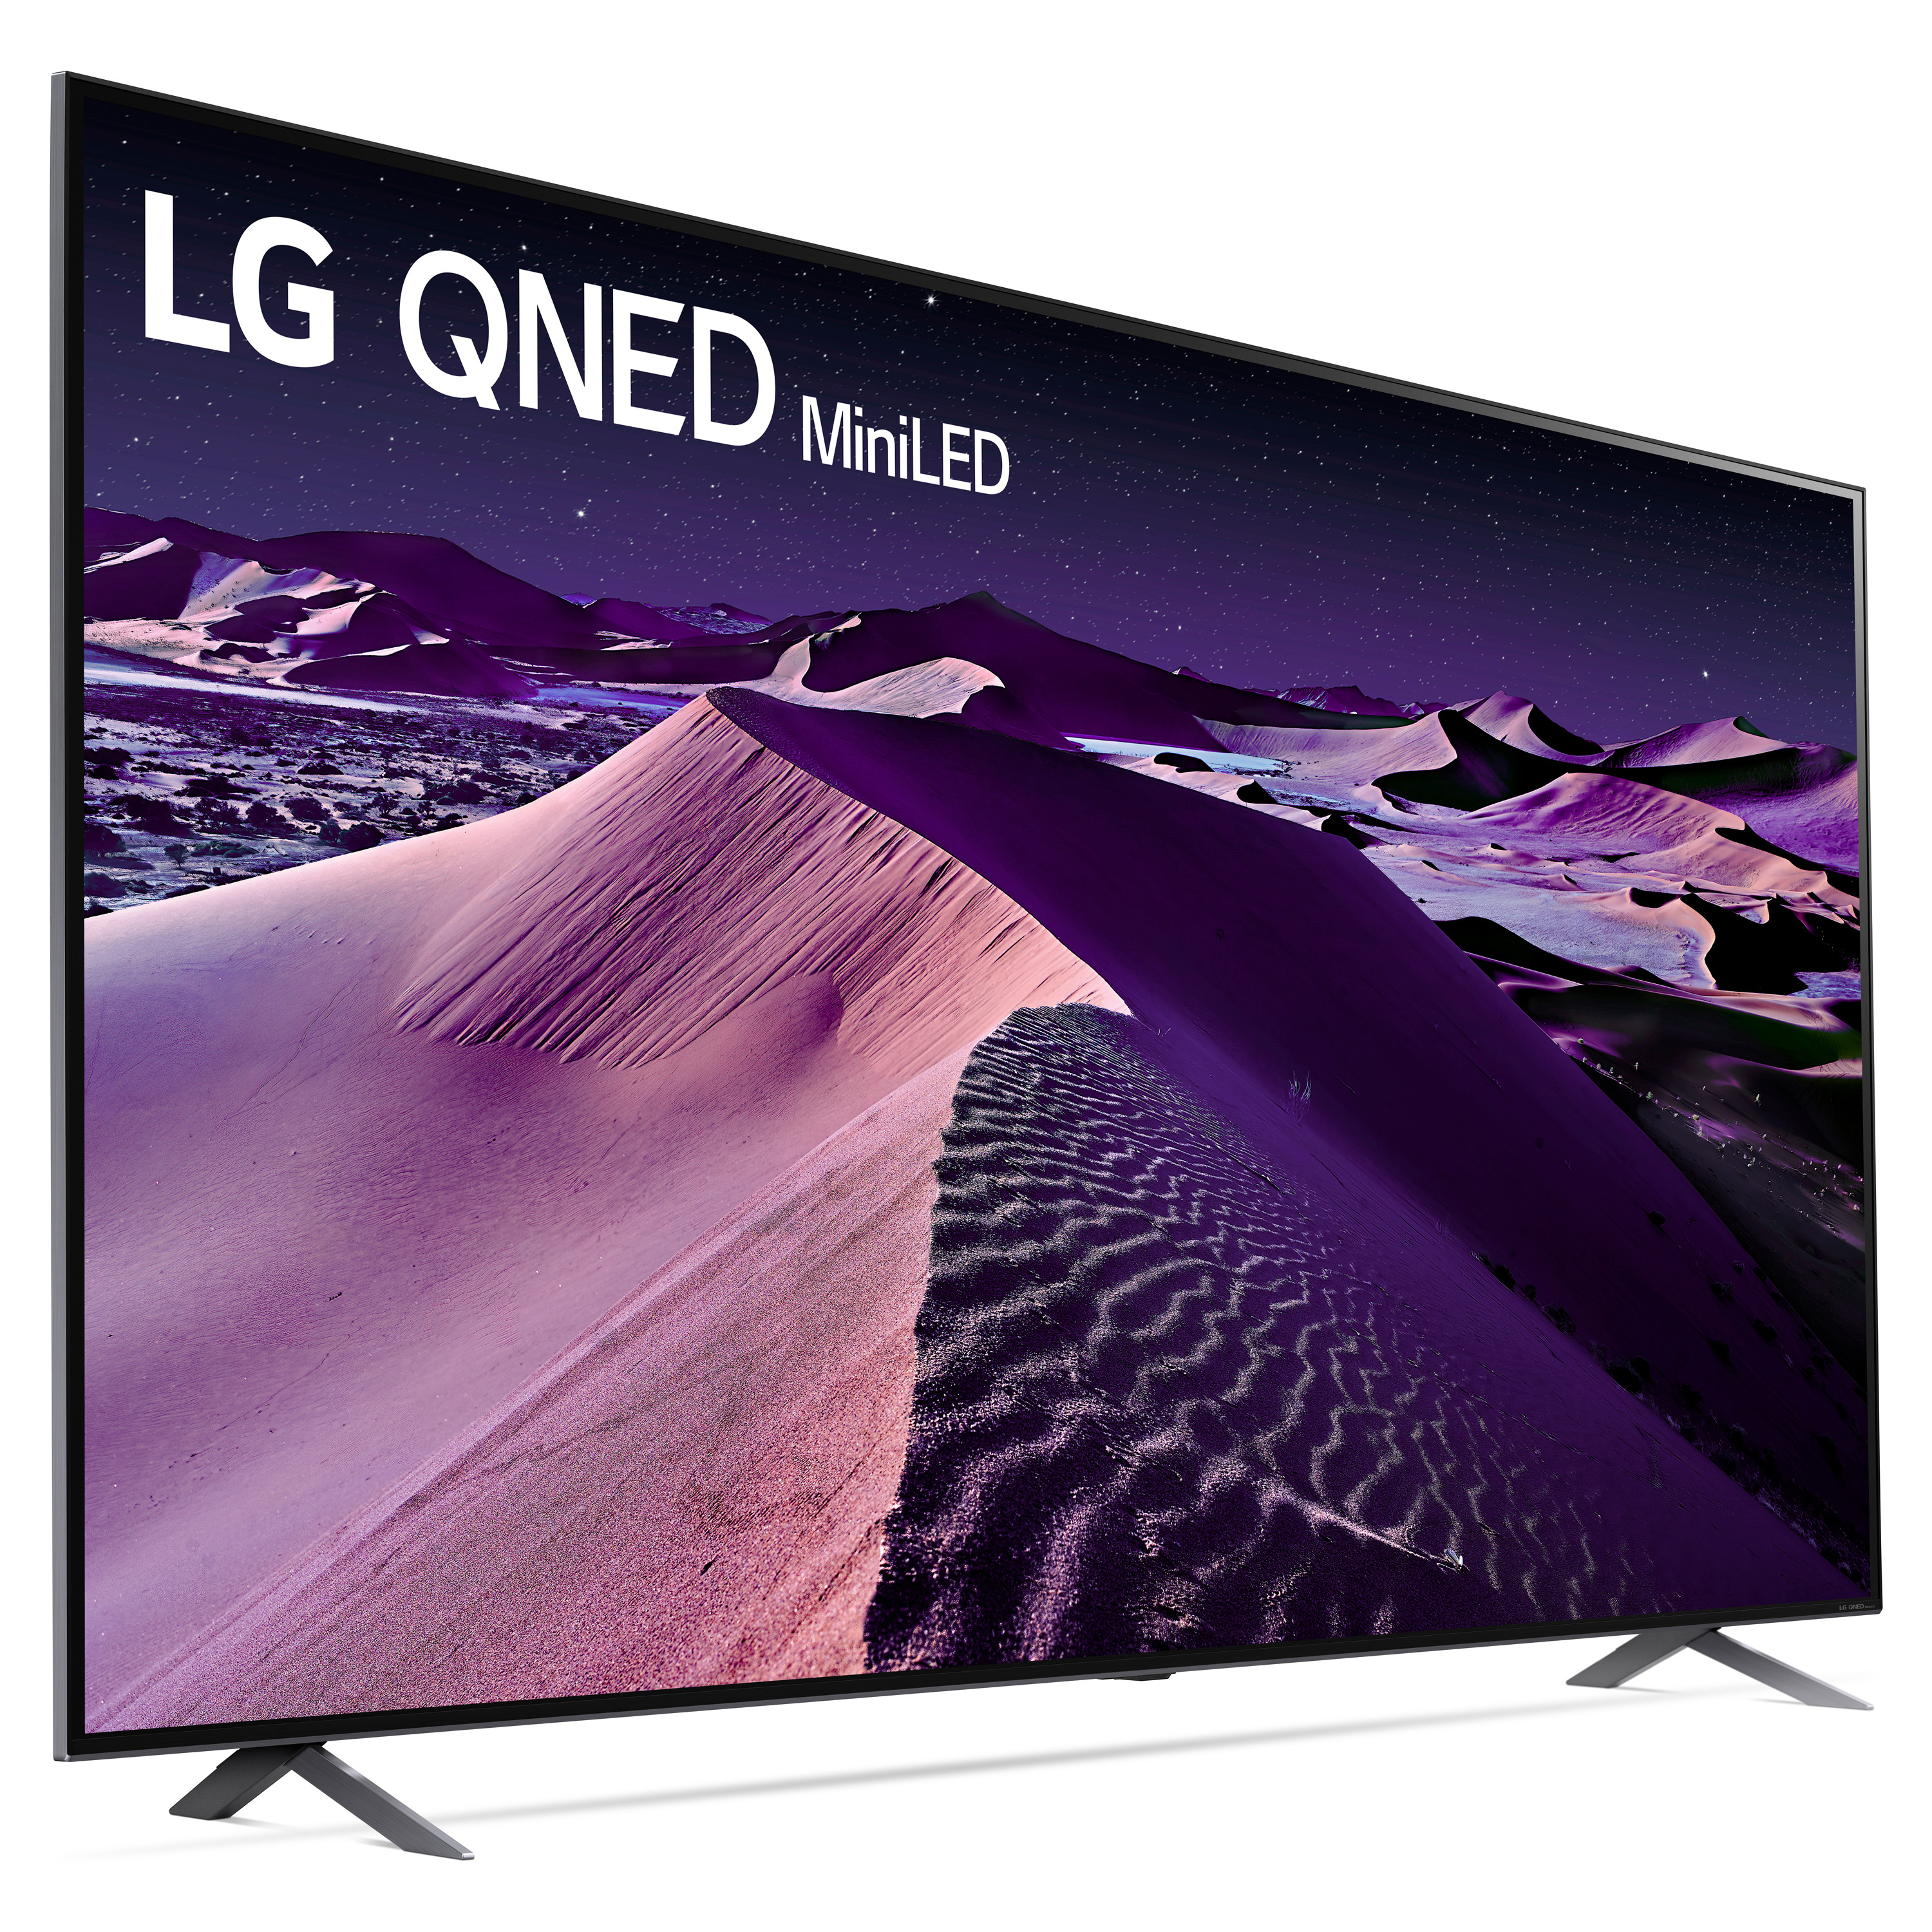 LG 75" Class 4K UHD QNED Web OS Smart TV with Dolby Vision 85 Series 75QNED85UQA - image 5 of 12